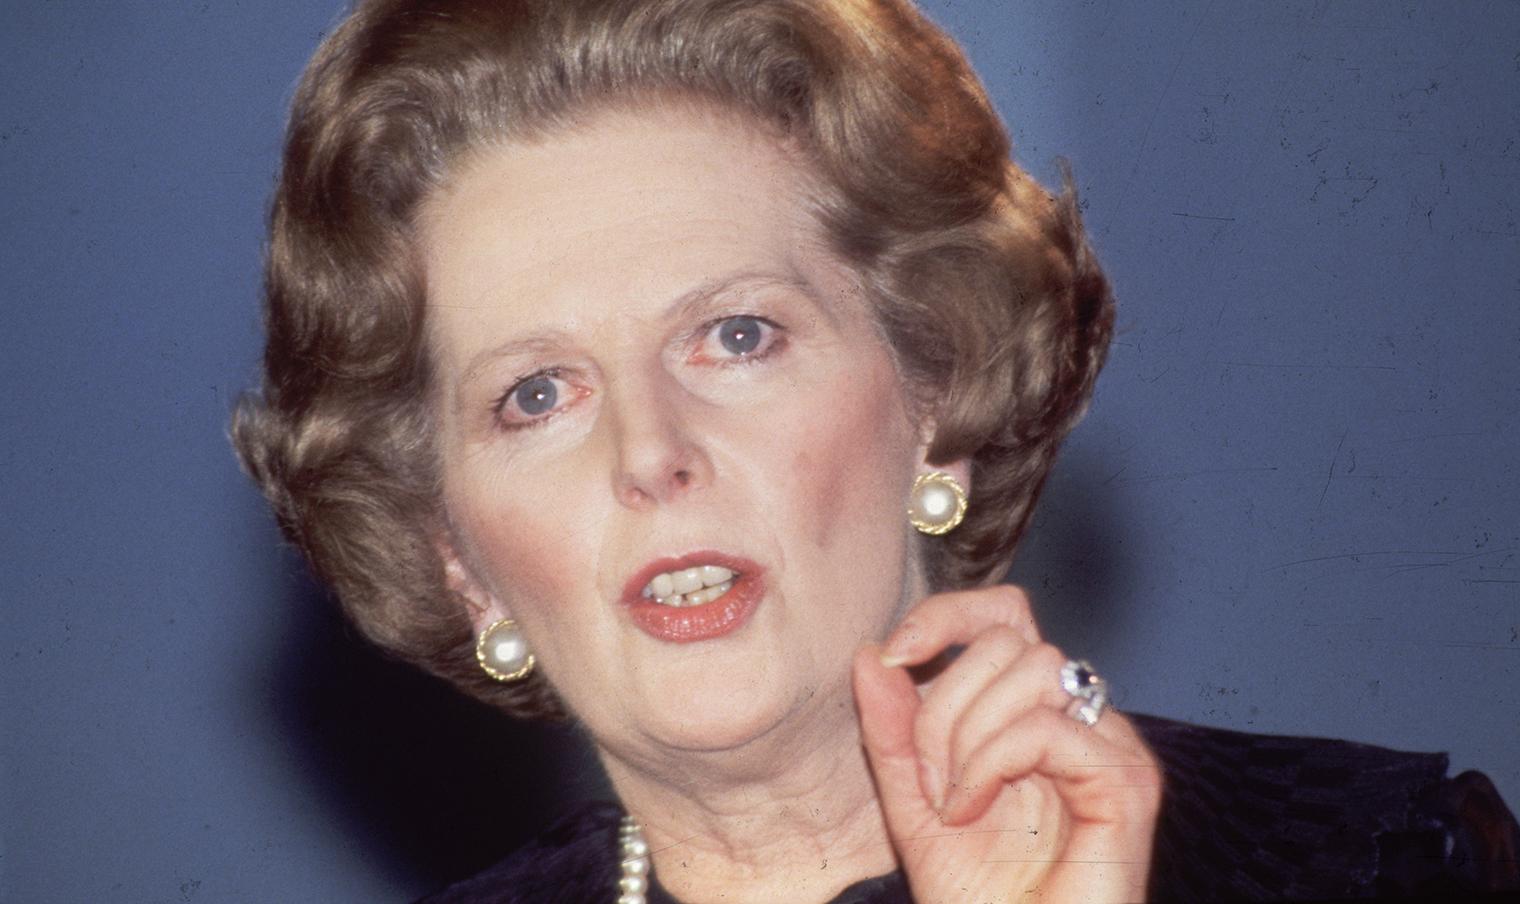 Margaret Thatcher when she was still alive and in power